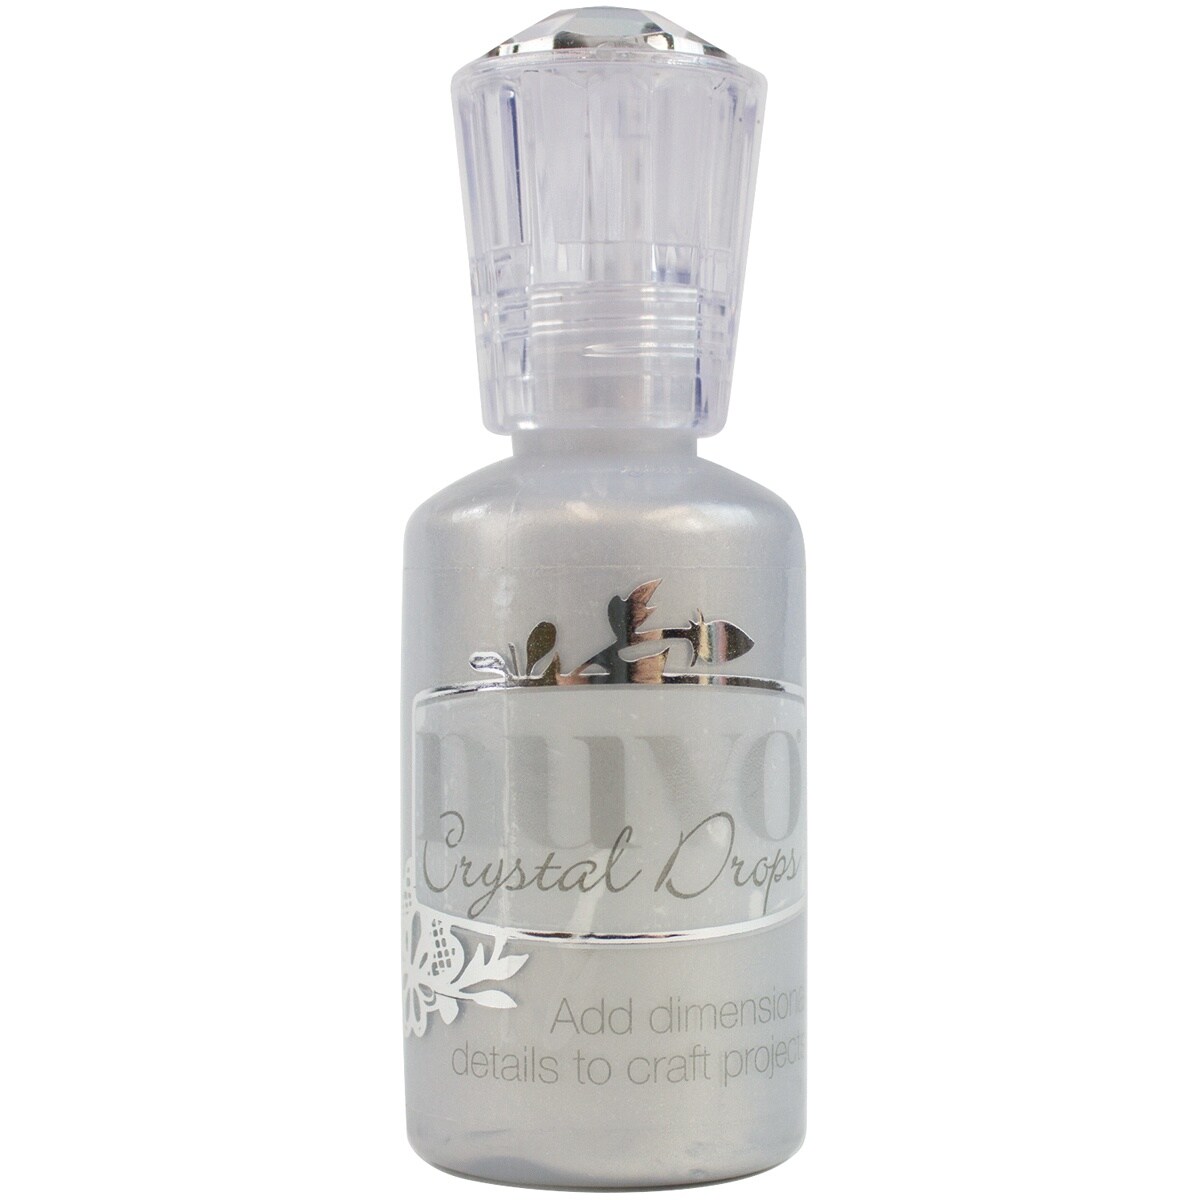 Multipack of 08 - Nuvo Crystal Drops 1.1oz-Metallic Silver Lining